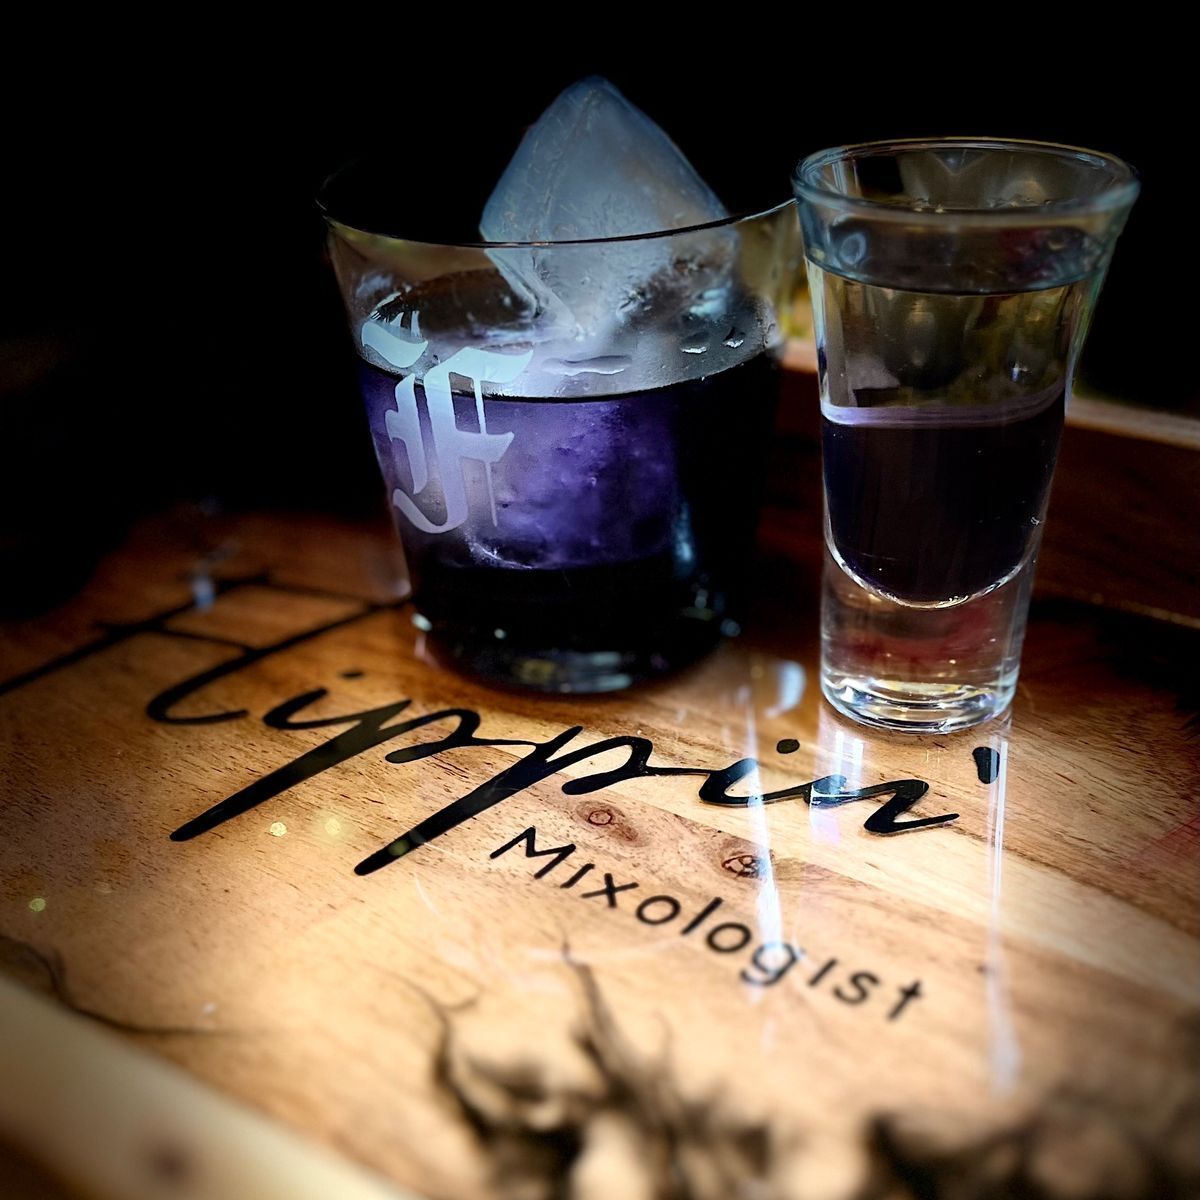 I was messing with layering for a shot when I wondered what would happen with Malibu and Creme de Violette- would they layer? Which would float? Turns out they don’t layer, but I didn’t mind once I tasted it. The flavors were an unexpected (to me) delight! 

It is very sweet, so I wanted to add something earthy to help balance it a bit. A little reposado tequila did the trick beautifully. It layers nicely on top for a shot and balances and blends well when shaken for a cocktail.

Give it a shot! No pun intended but also very intended 😉.